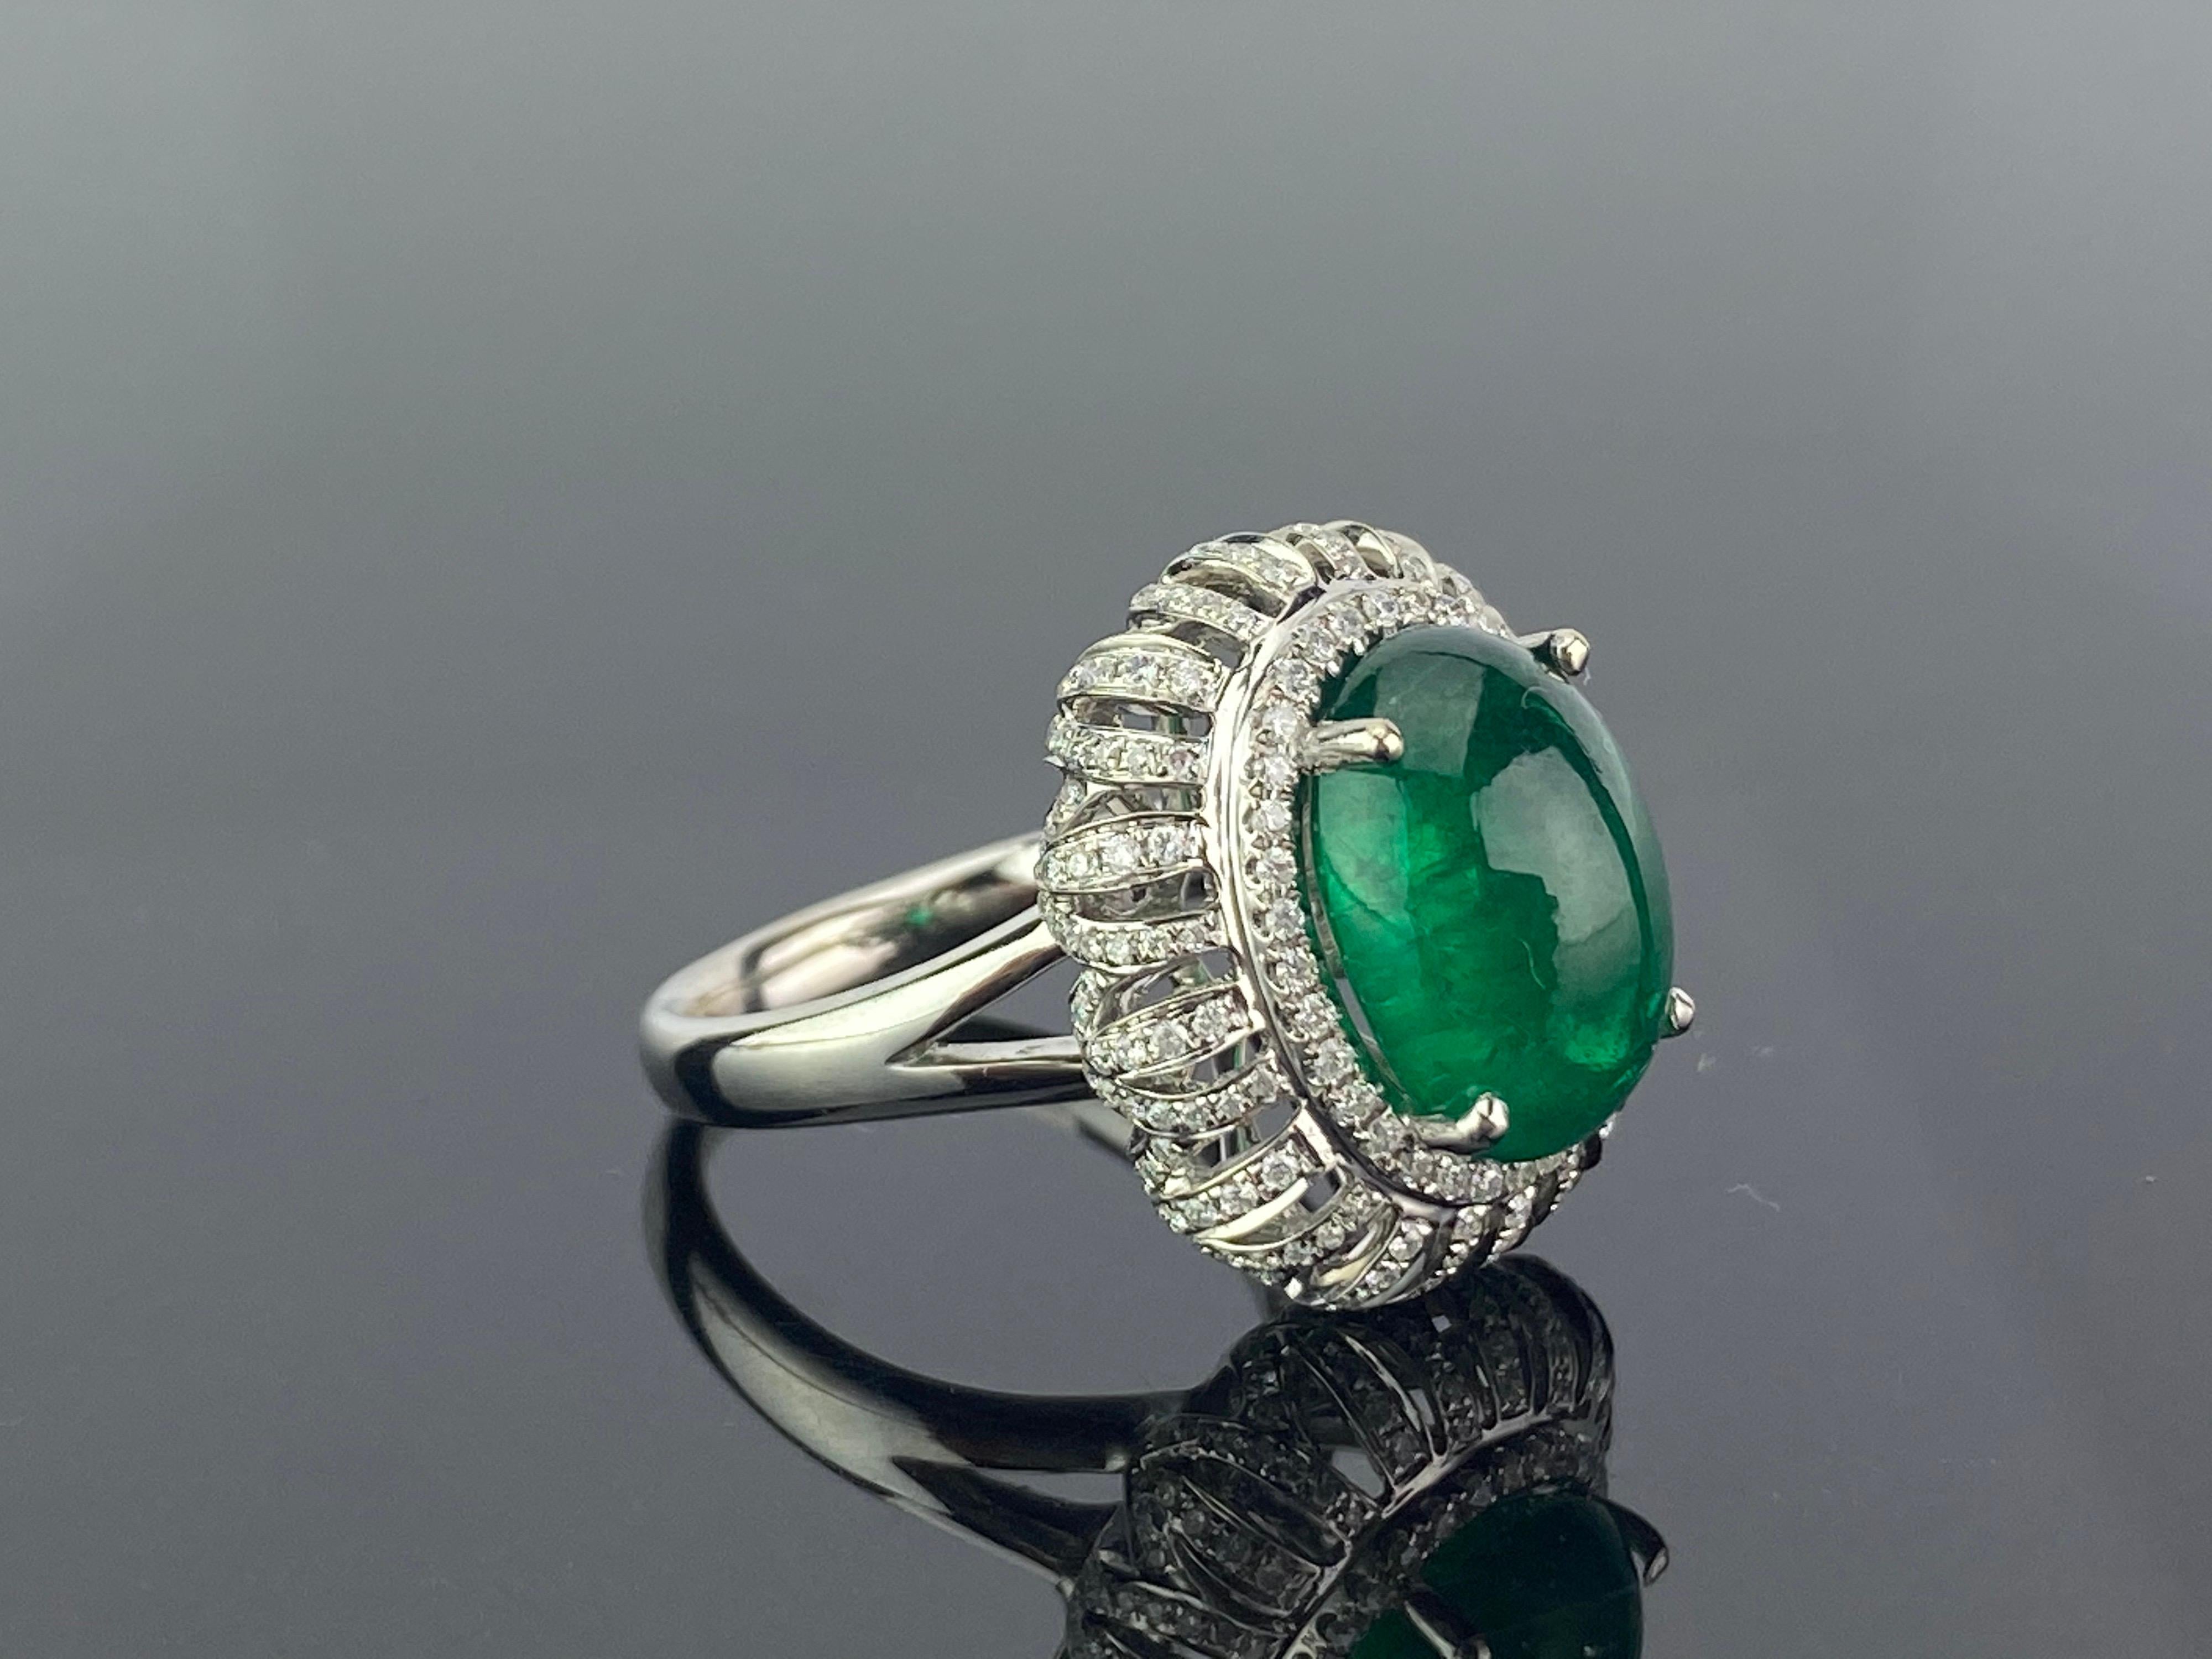 7.09 Carat Emerald Cabochon and Diamond Cocktail Ring For Sale at 1stDibs